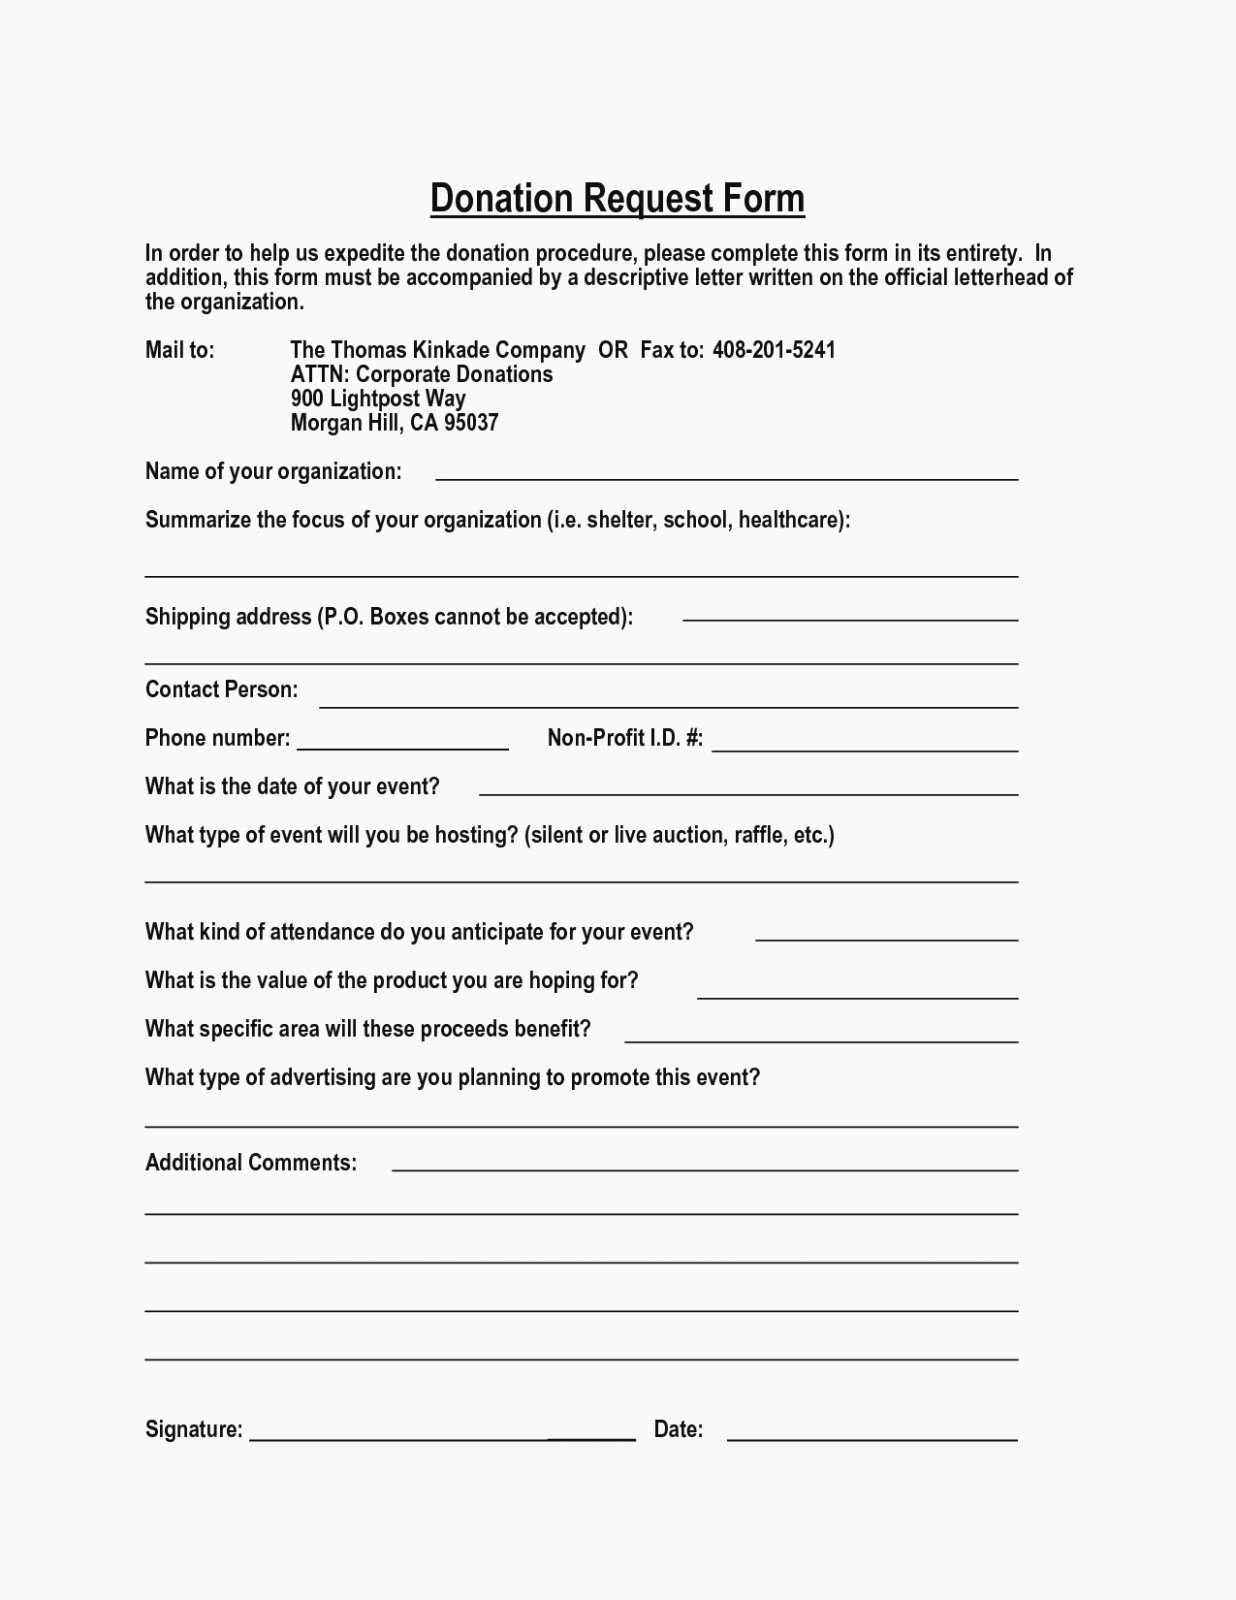 Donation Request form Template New All You Need to Know About